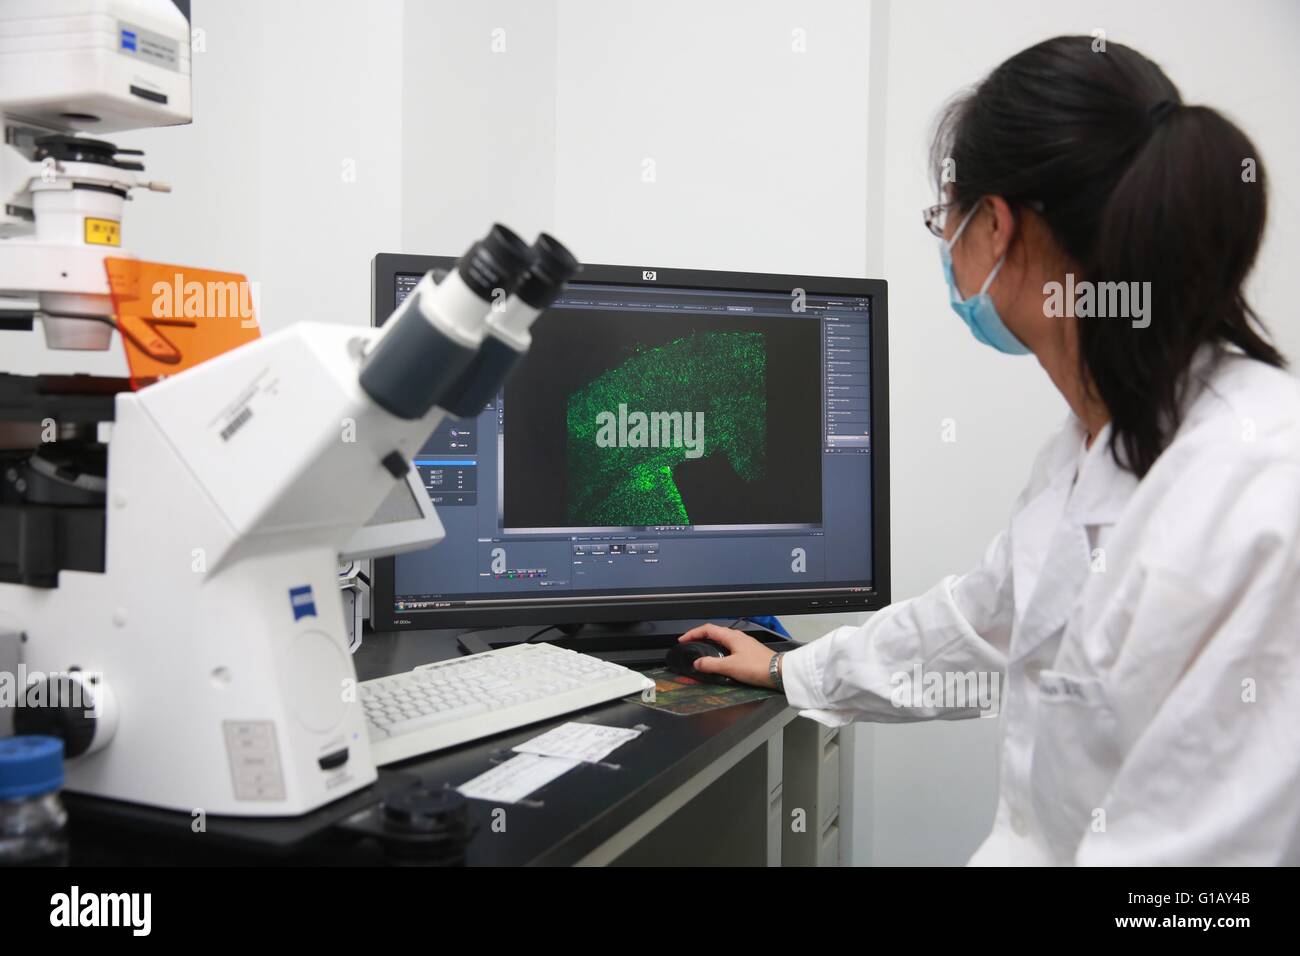 Beijing, China. 11th May, 2016. A researcher shows image of the neural stem cells from the mouse infected by Zika virus at the Institute of Genetics and Developmental Biology of the Chinese Academy of Sciences in Beijing, capital of China, May 11, 2016. Chinese researchers said Wednesday they have found direct evidence that Zika infection causes microcephaly, a birth defect marked by an abnormally small head, in mouse experiments. © Cai Yang/Xinhua/Alamy Live News Stock Photo